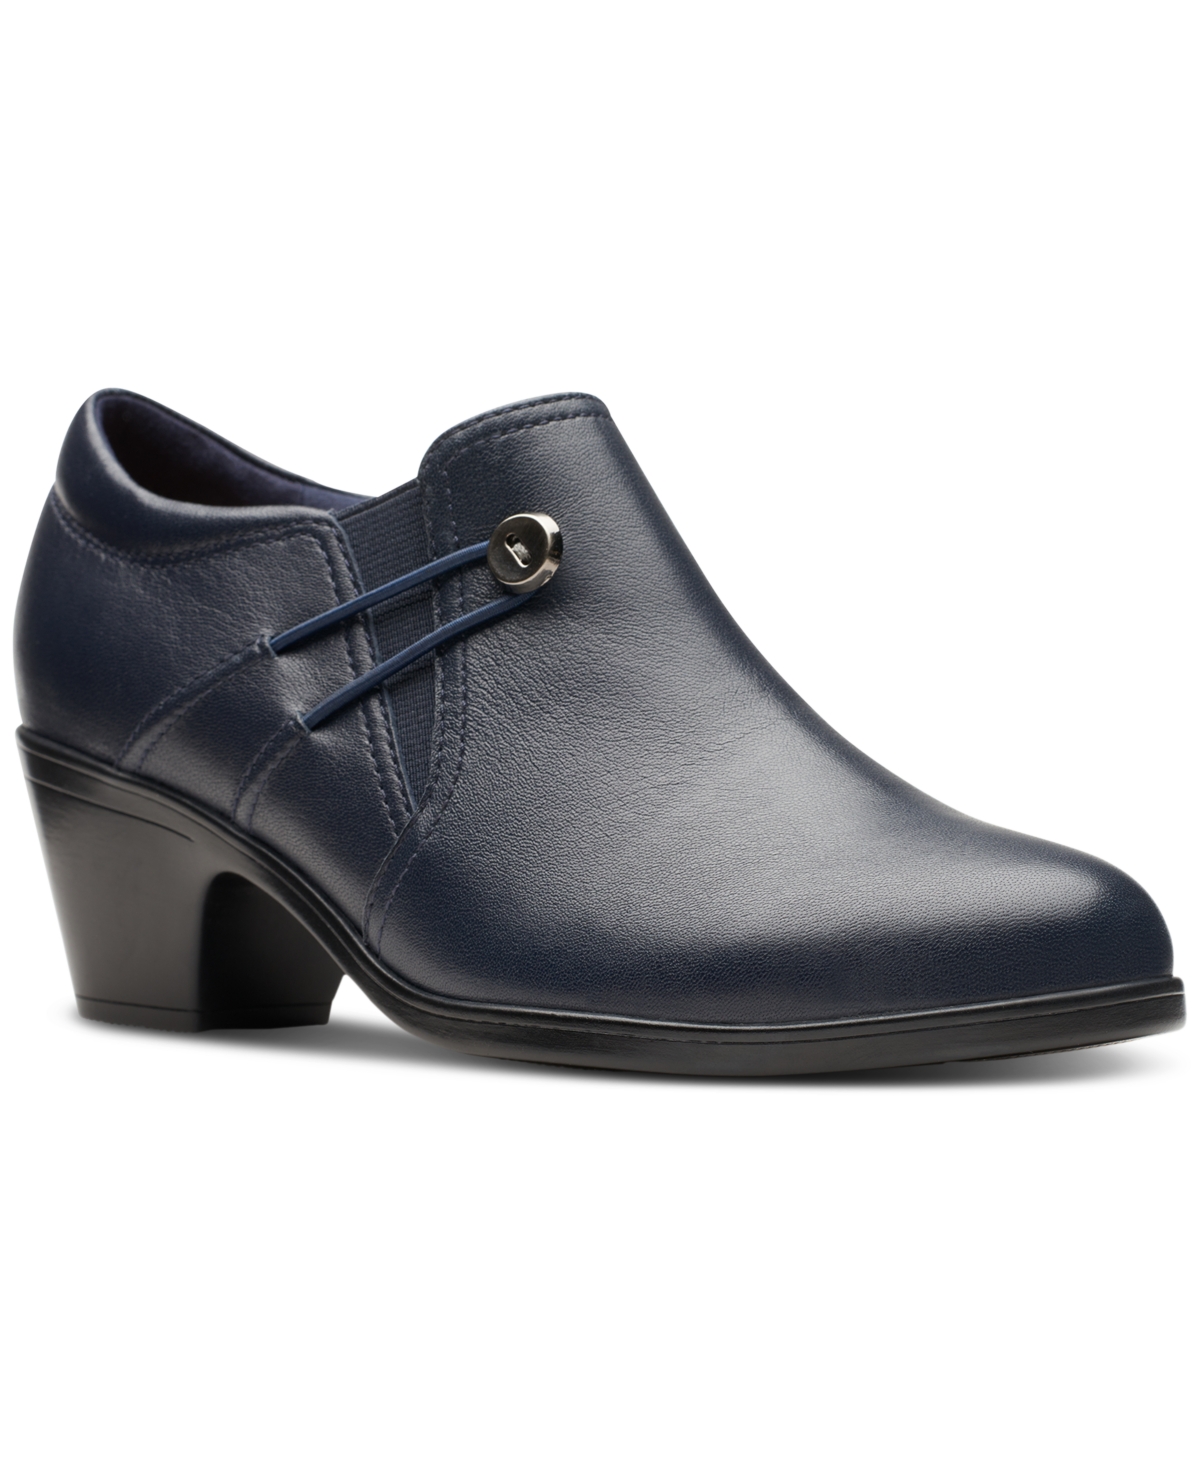 Women's Emily 2 Erin Ankle Booties - Navy Leather